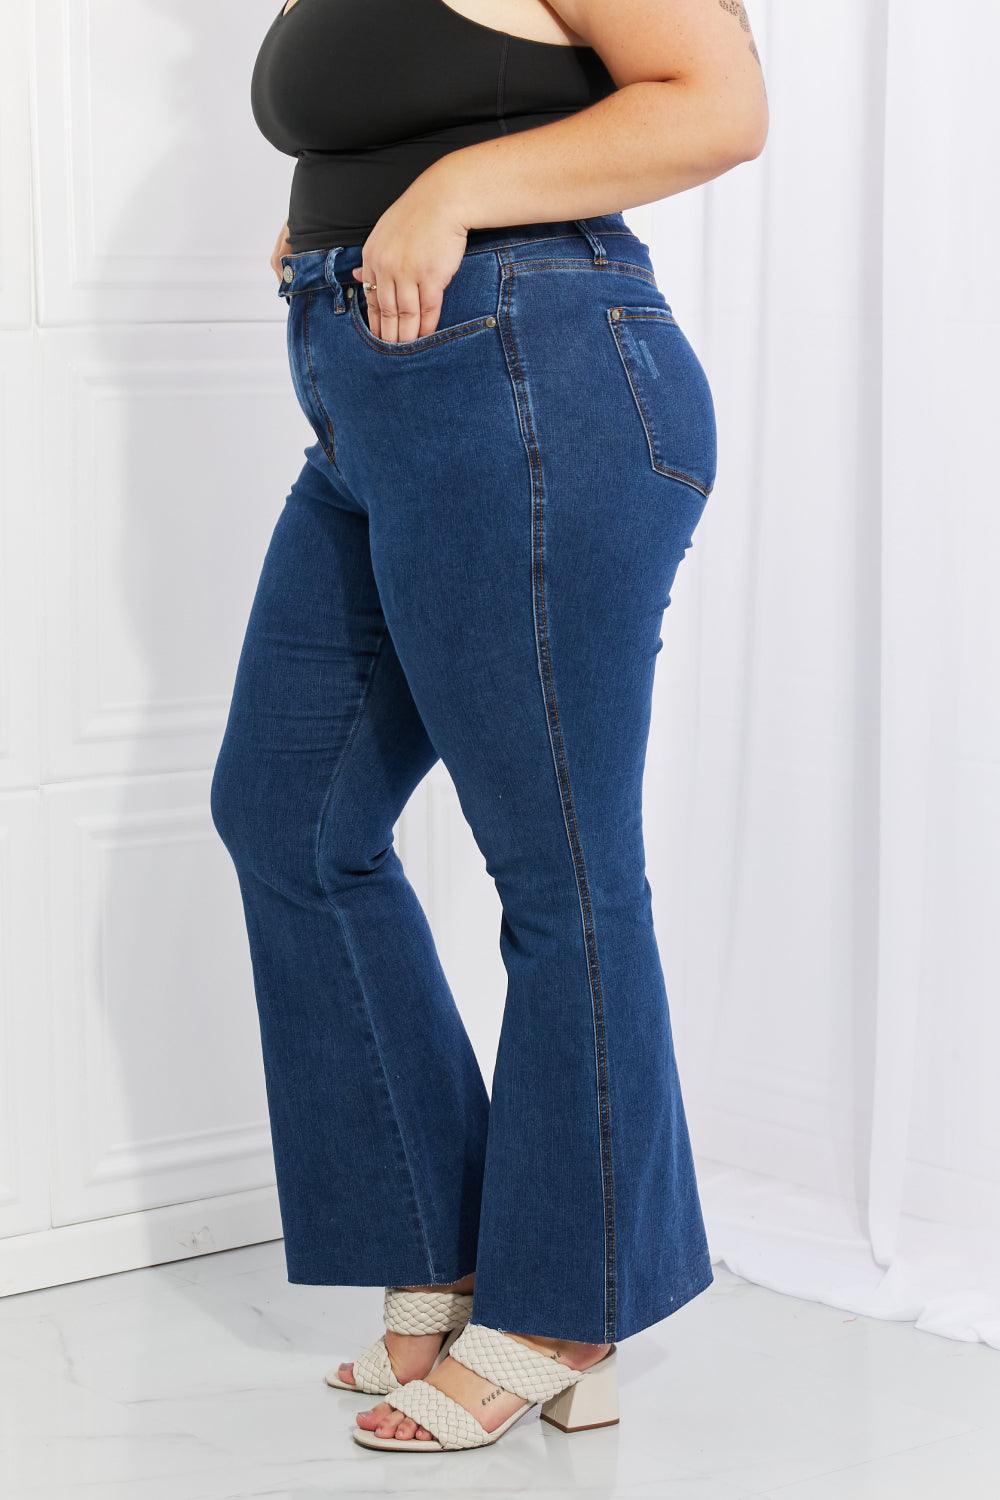 Buy Ava Mid Rise Wide Leg Pull-On Jeans for CAD 94.00